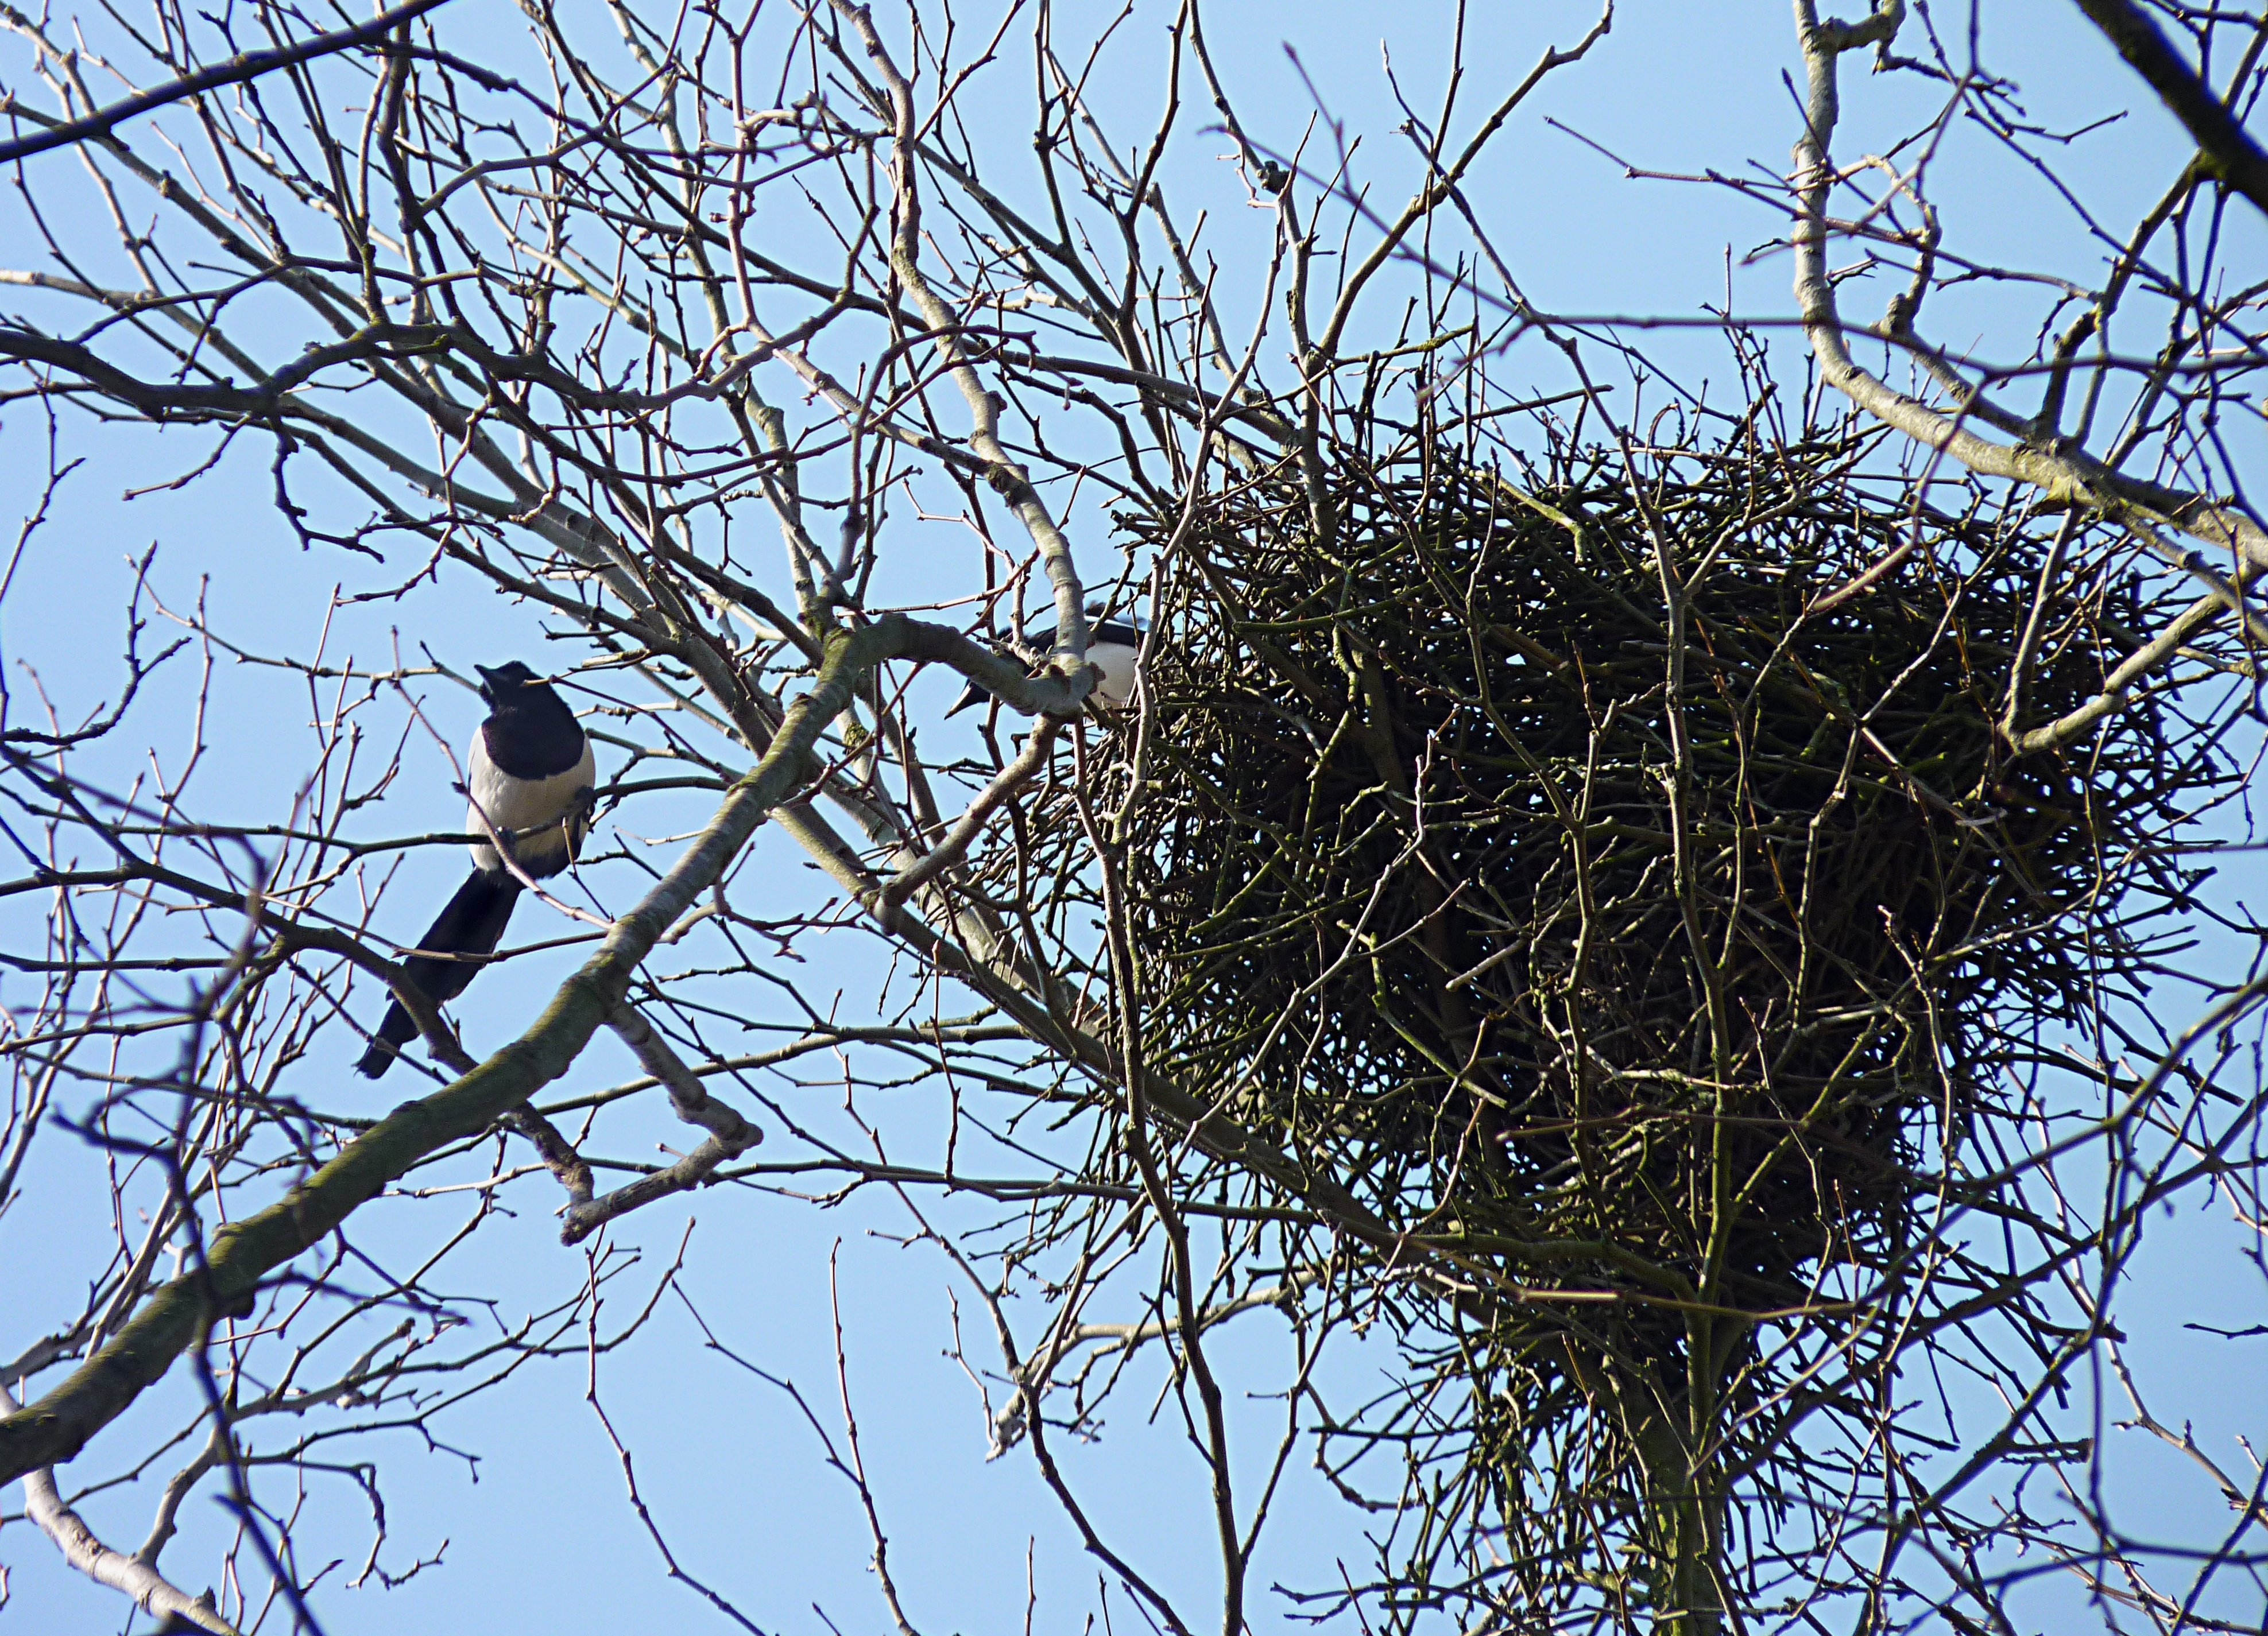 Eurasian Magpies near their nest, in the municipal park of Mouscron, Belgium. Photo by [Jamain](https://commons.wikimedia.org/wiki/User:Jamain) via [Wikimedia](https://commons.wikimedia.org/wiki/File:Magpies_near_their_nest_J1.jpg). ([CC BY-SA 3.0](https://creativecommons.org/licenses/by-sa/3.0/deed.en)).